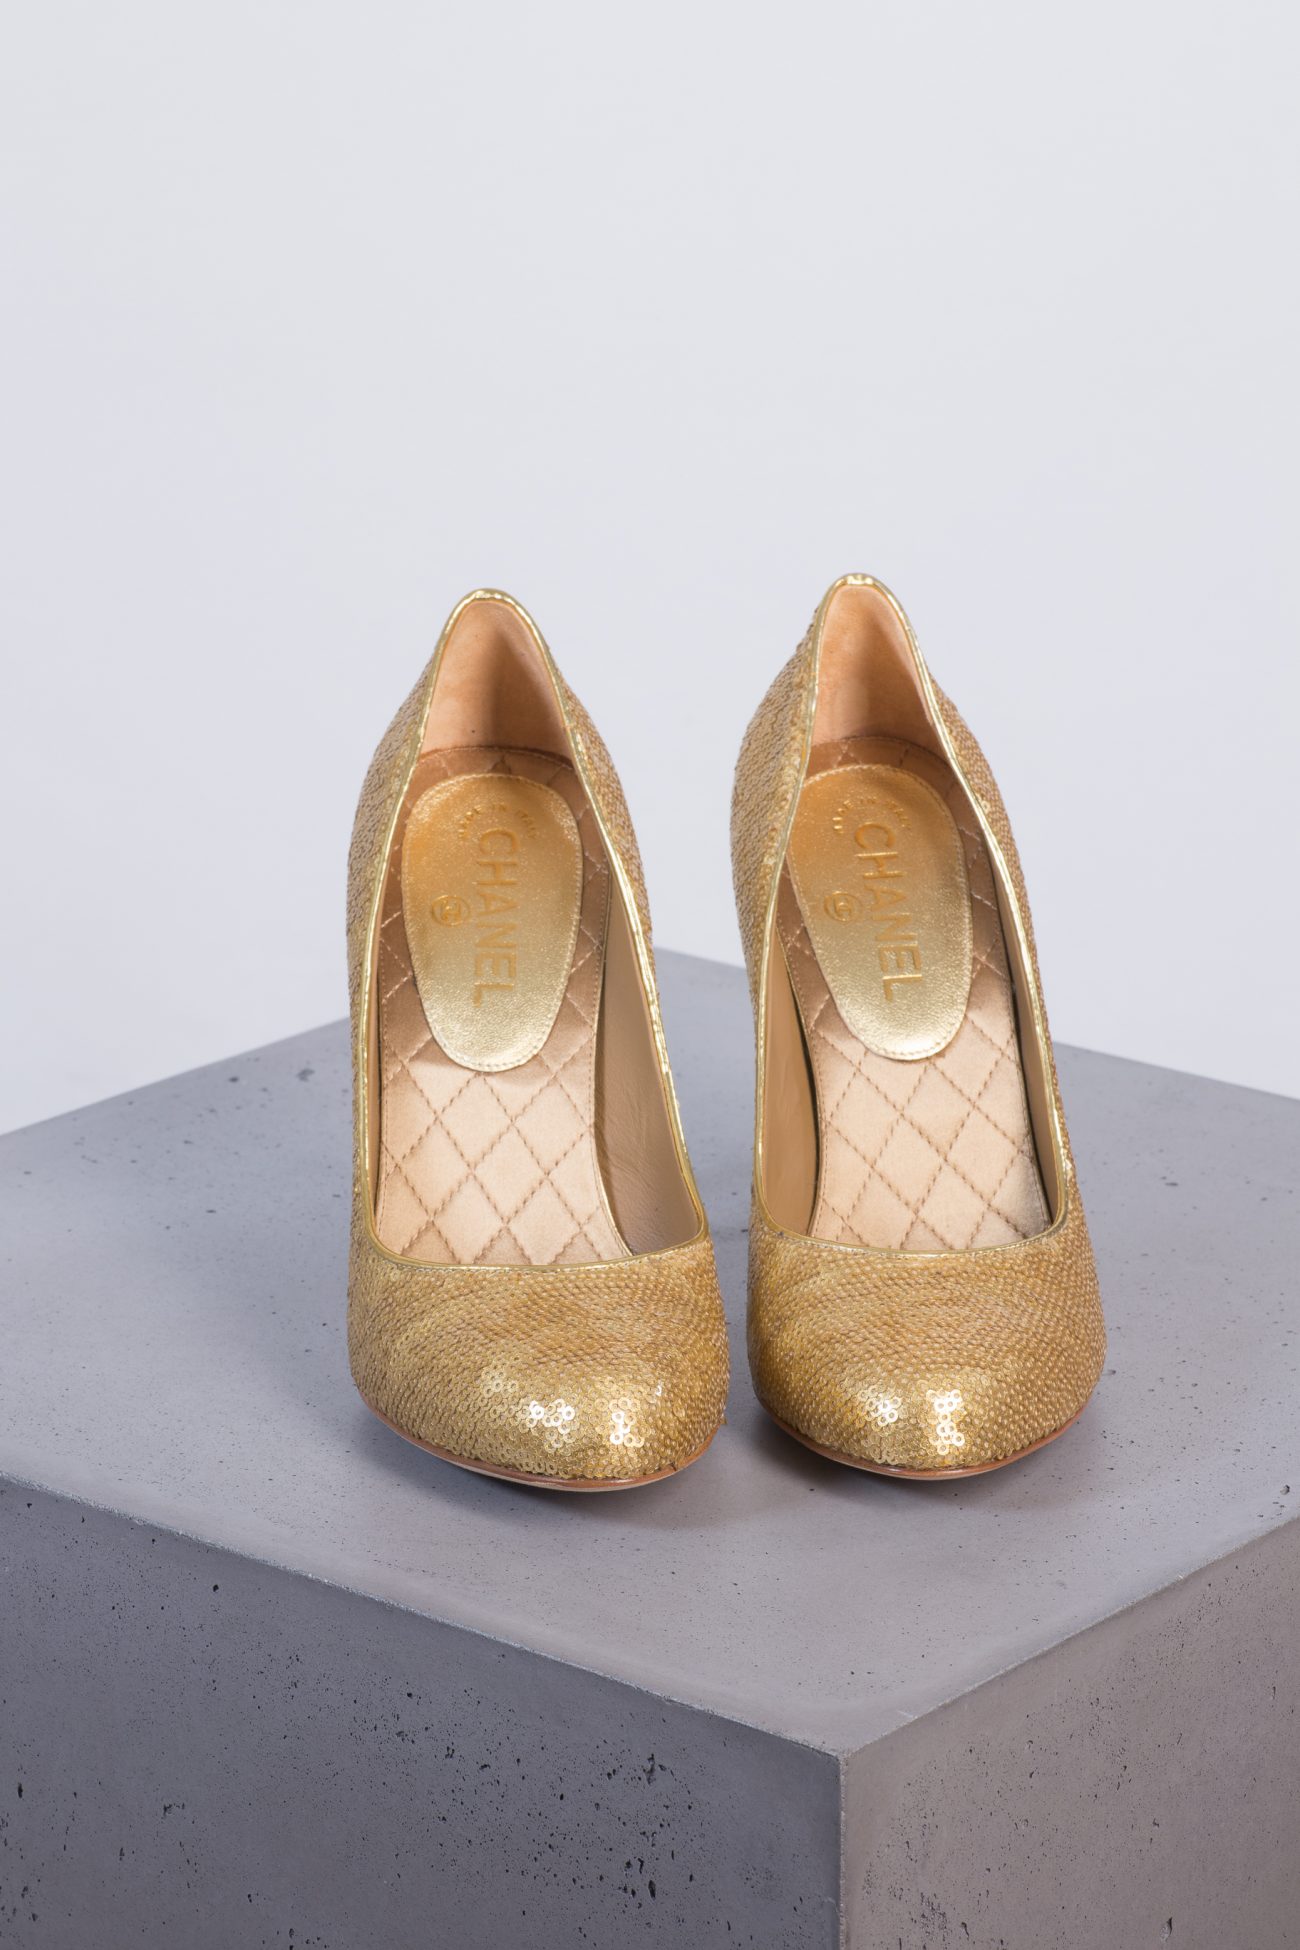 Chanel Shoes, 38.5 - Huntessa Luxury Online Consignment Boutique